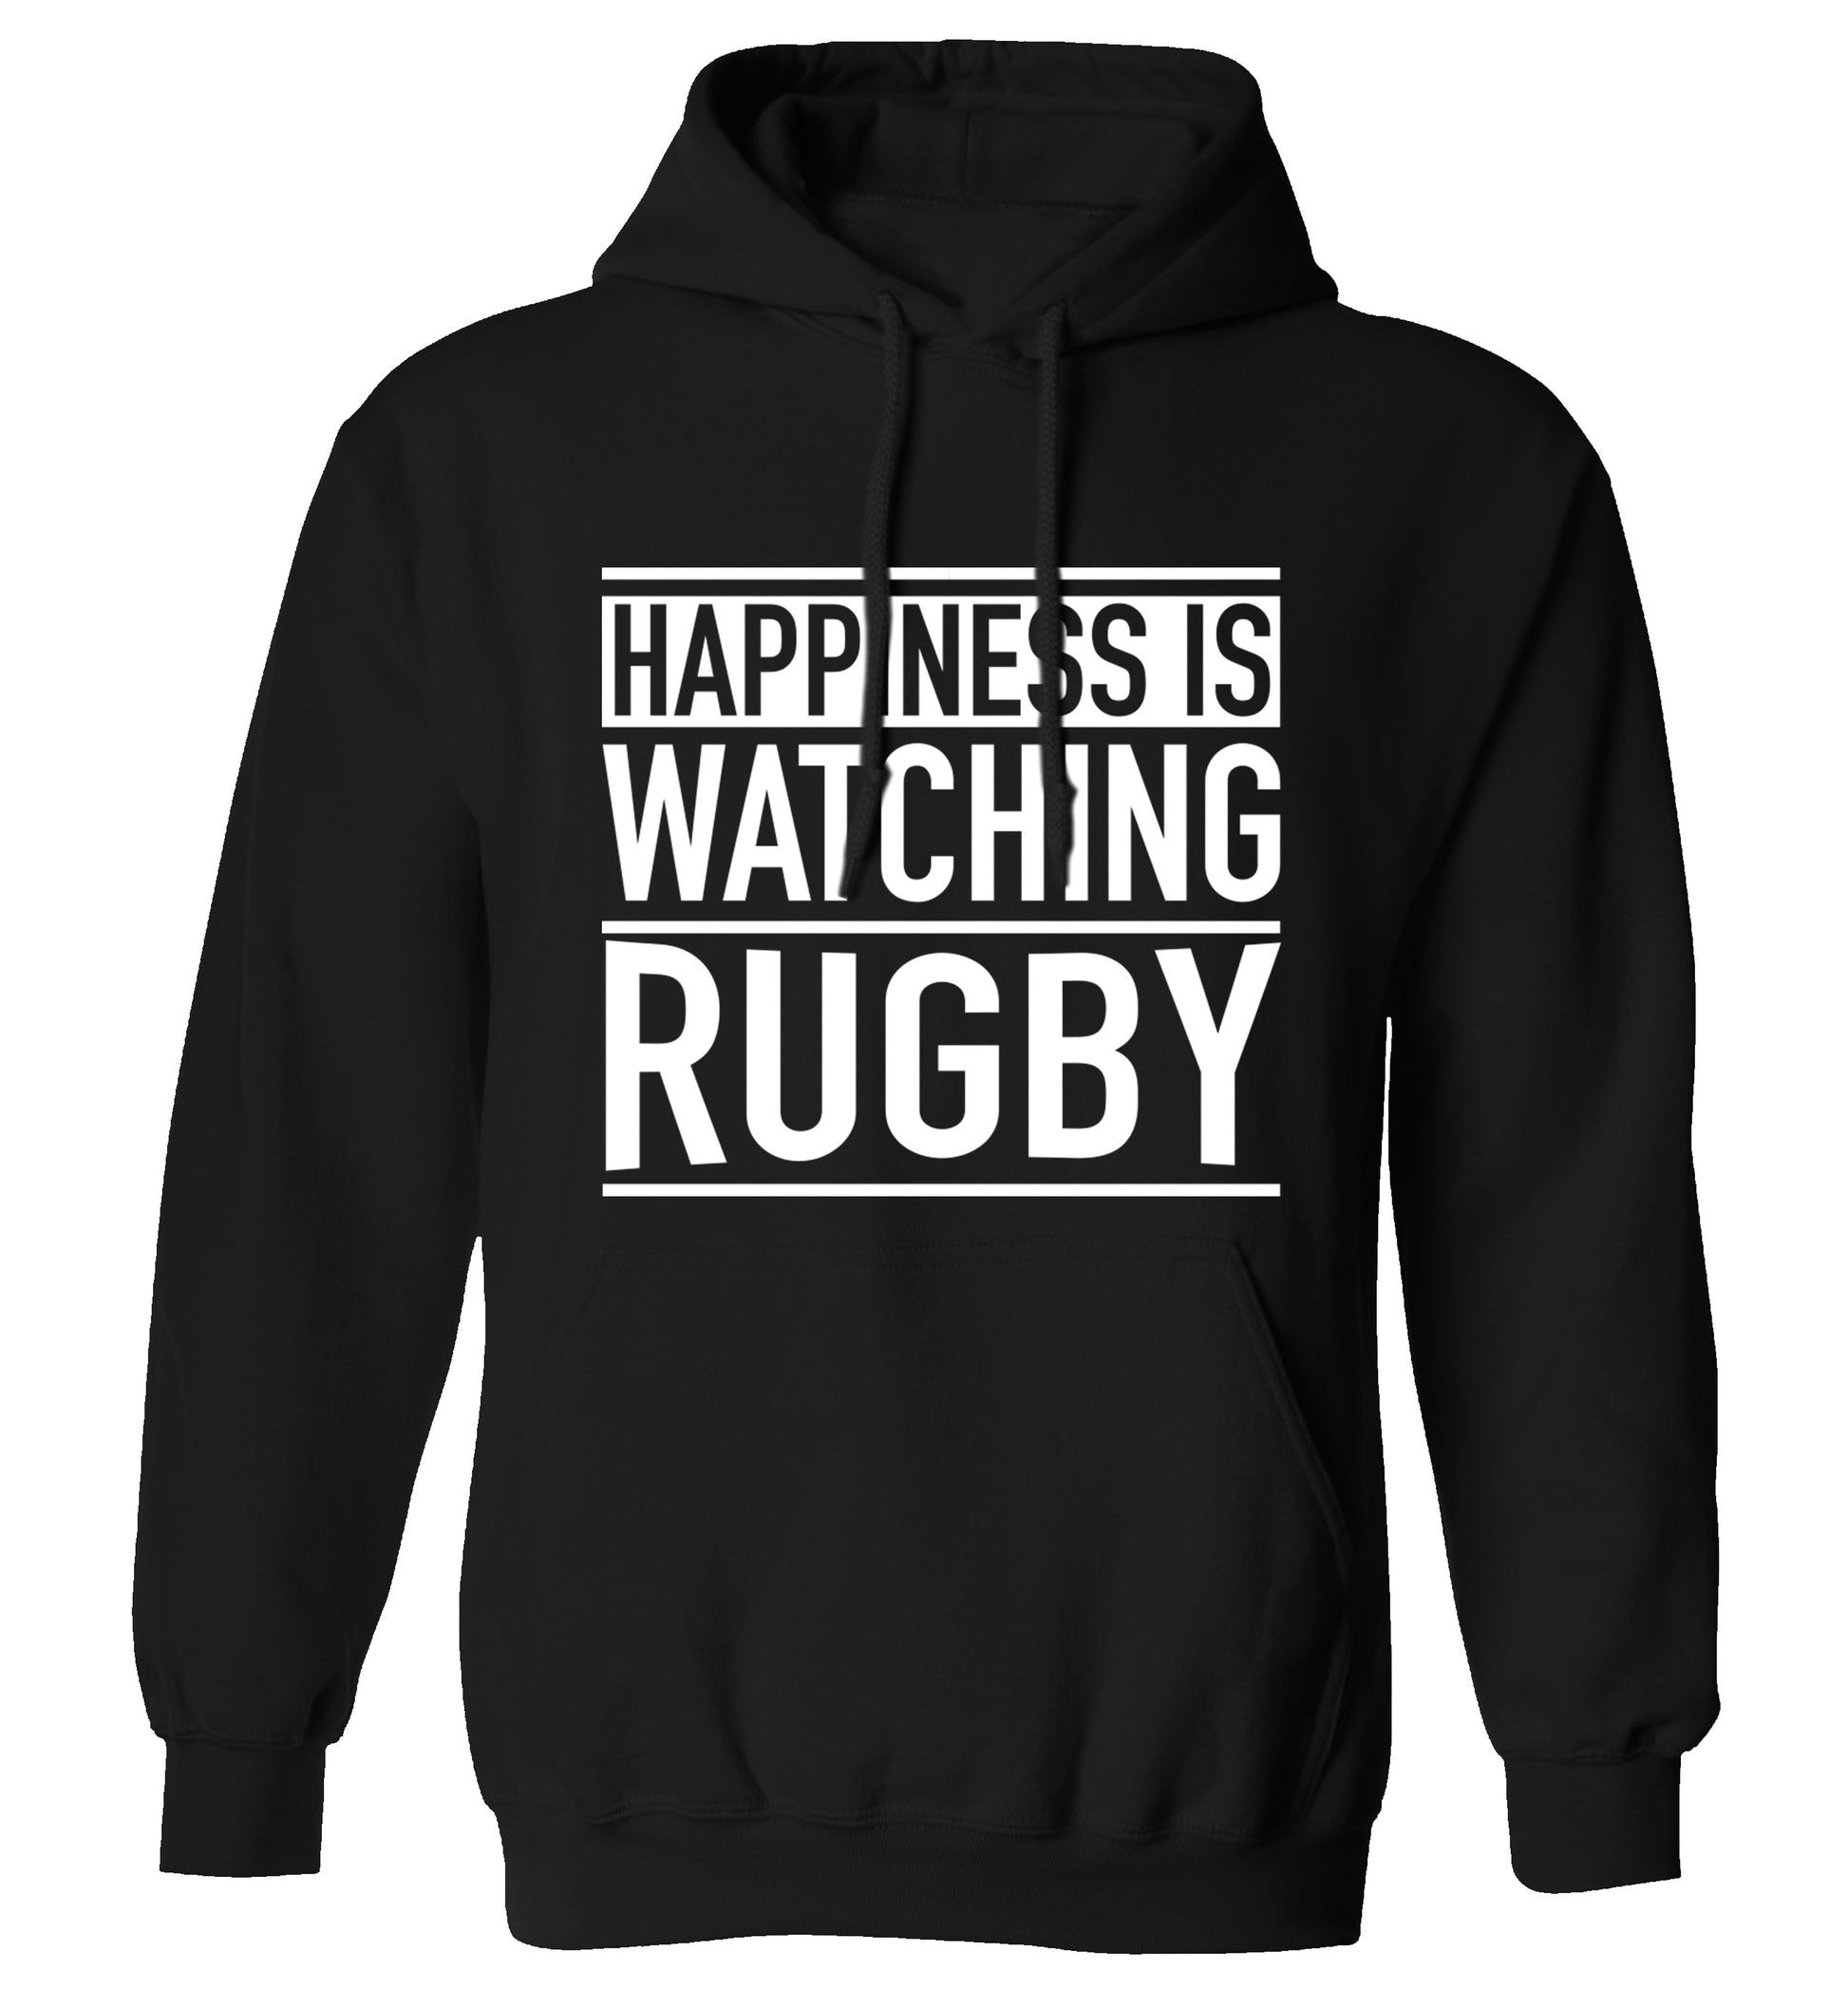 Happiness is watching rugby adults unisex black hoodie 2XL